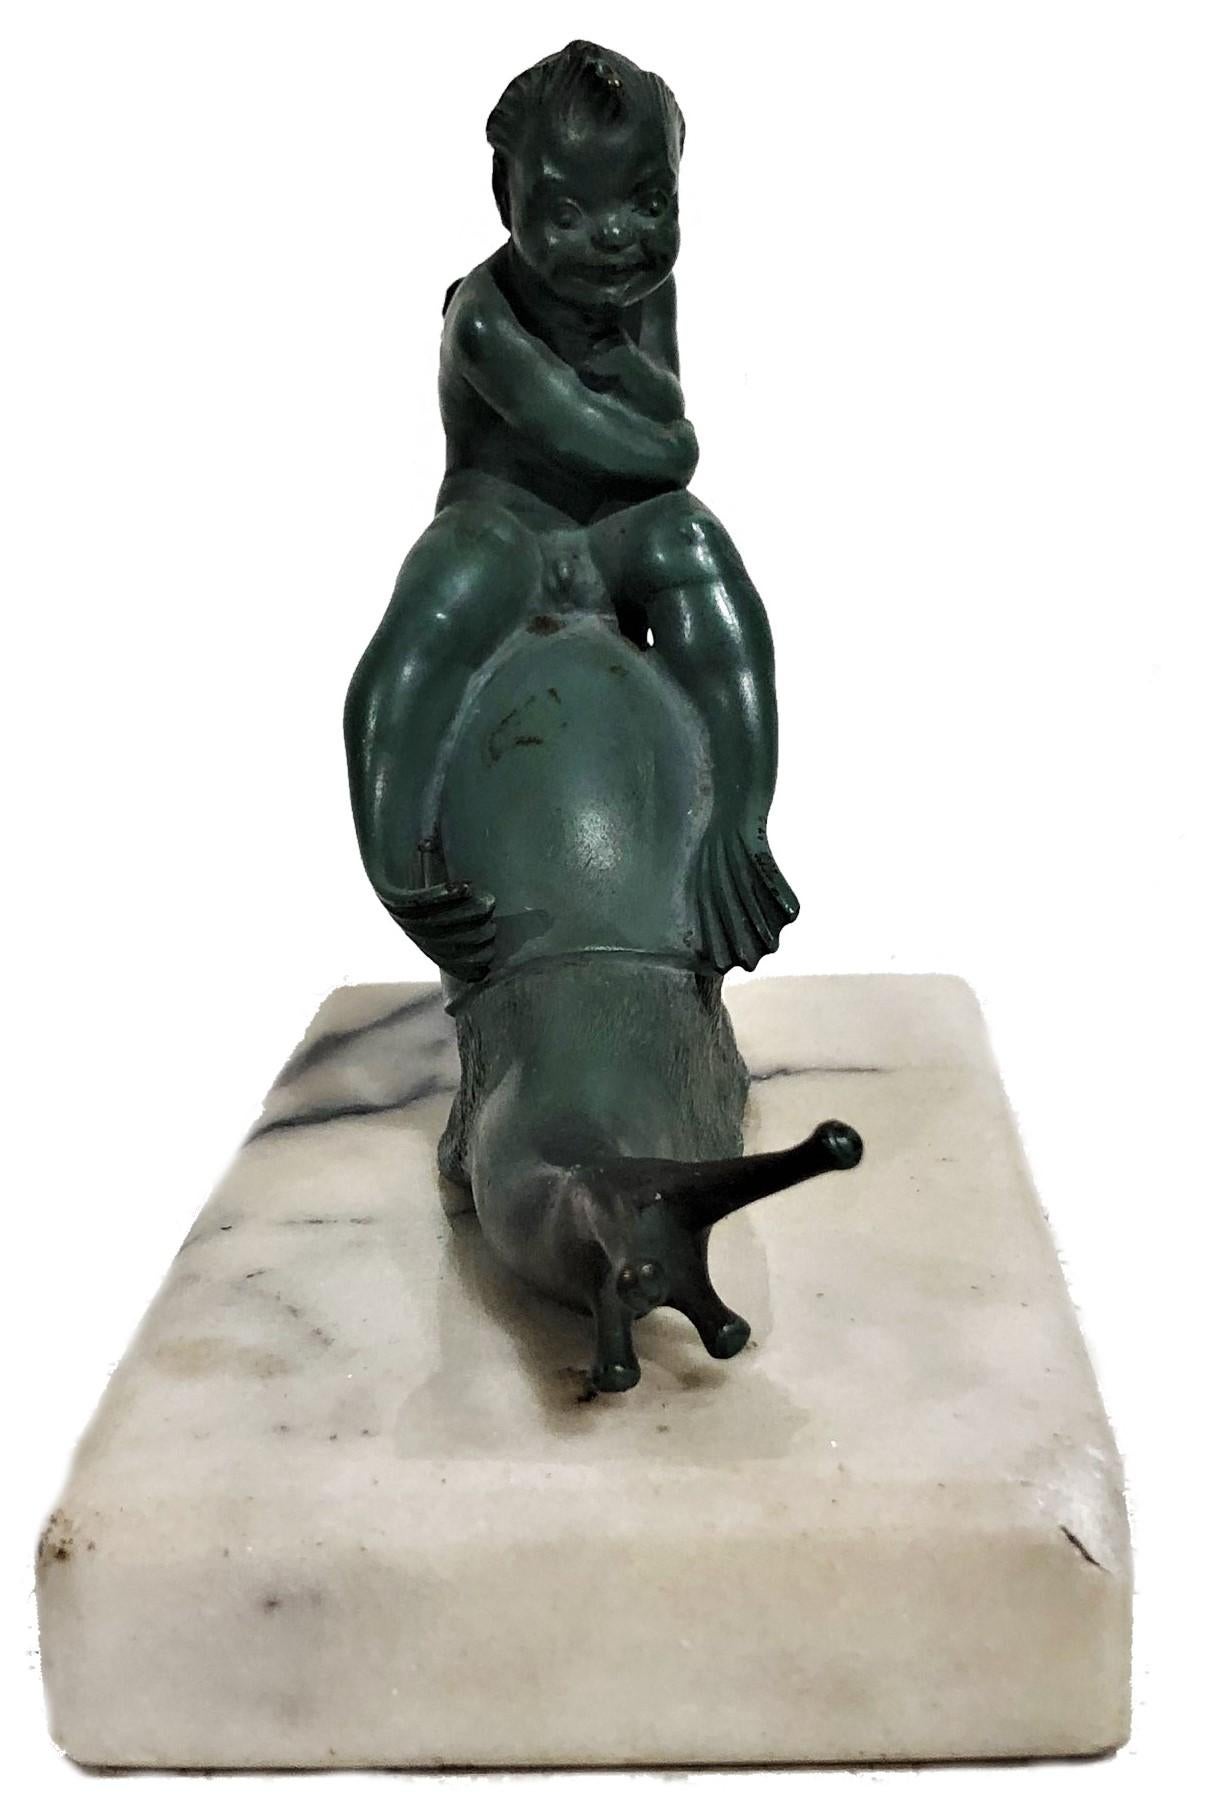 ABOUT
This elegant Austrian Jugenstil sculptural desk paperweight depicts some fantastic half-human creature from the underwater world, riding a snail. Signed C. Fiala, dark-green cold-painted bronze, Vienna, ca. 1910. Original marble base (a few